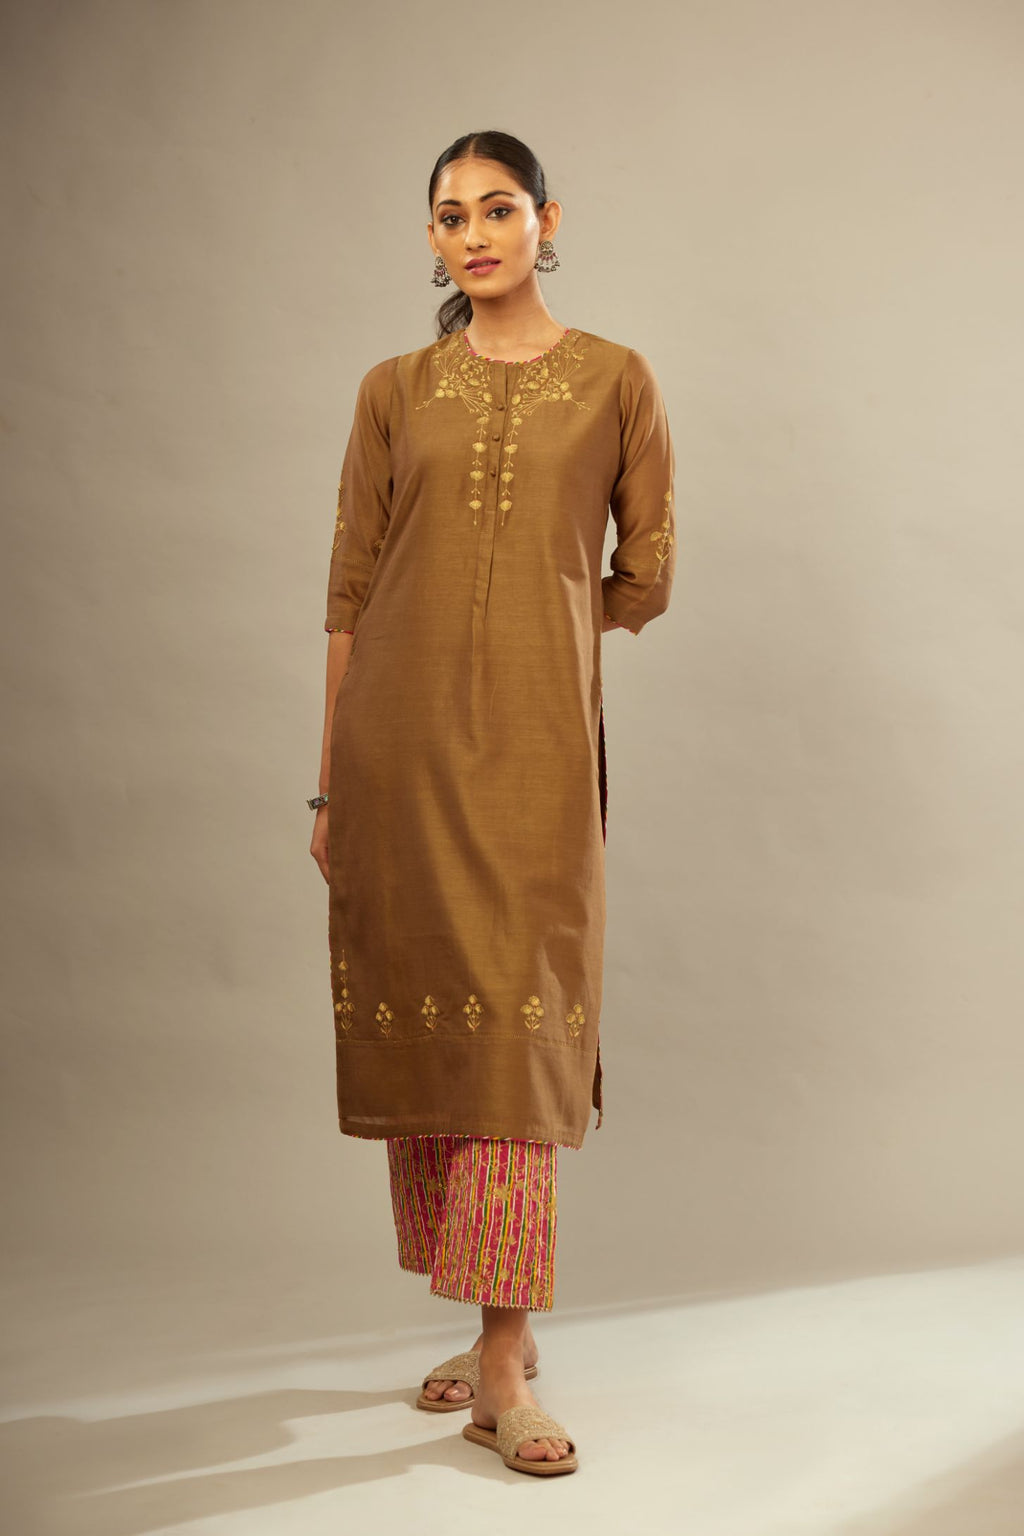 Olive straight kurta set with silver zari and contrasting thread embroidery, hem and sleeves highlighted with zari faggoting.